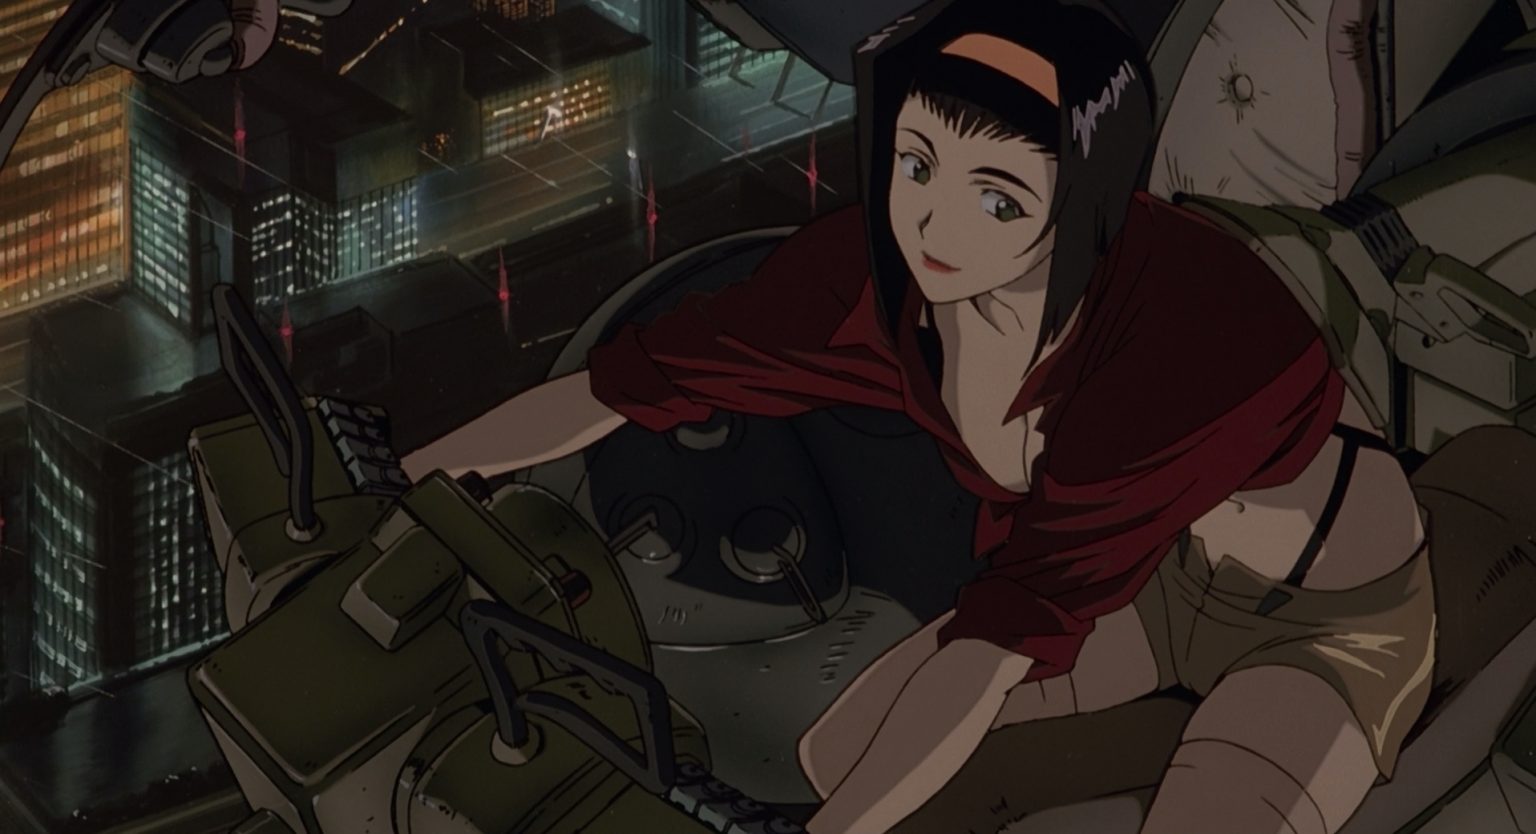 Cowboy Bebop: Faye Valentine’s Outfit Will Be Changed For Netflix